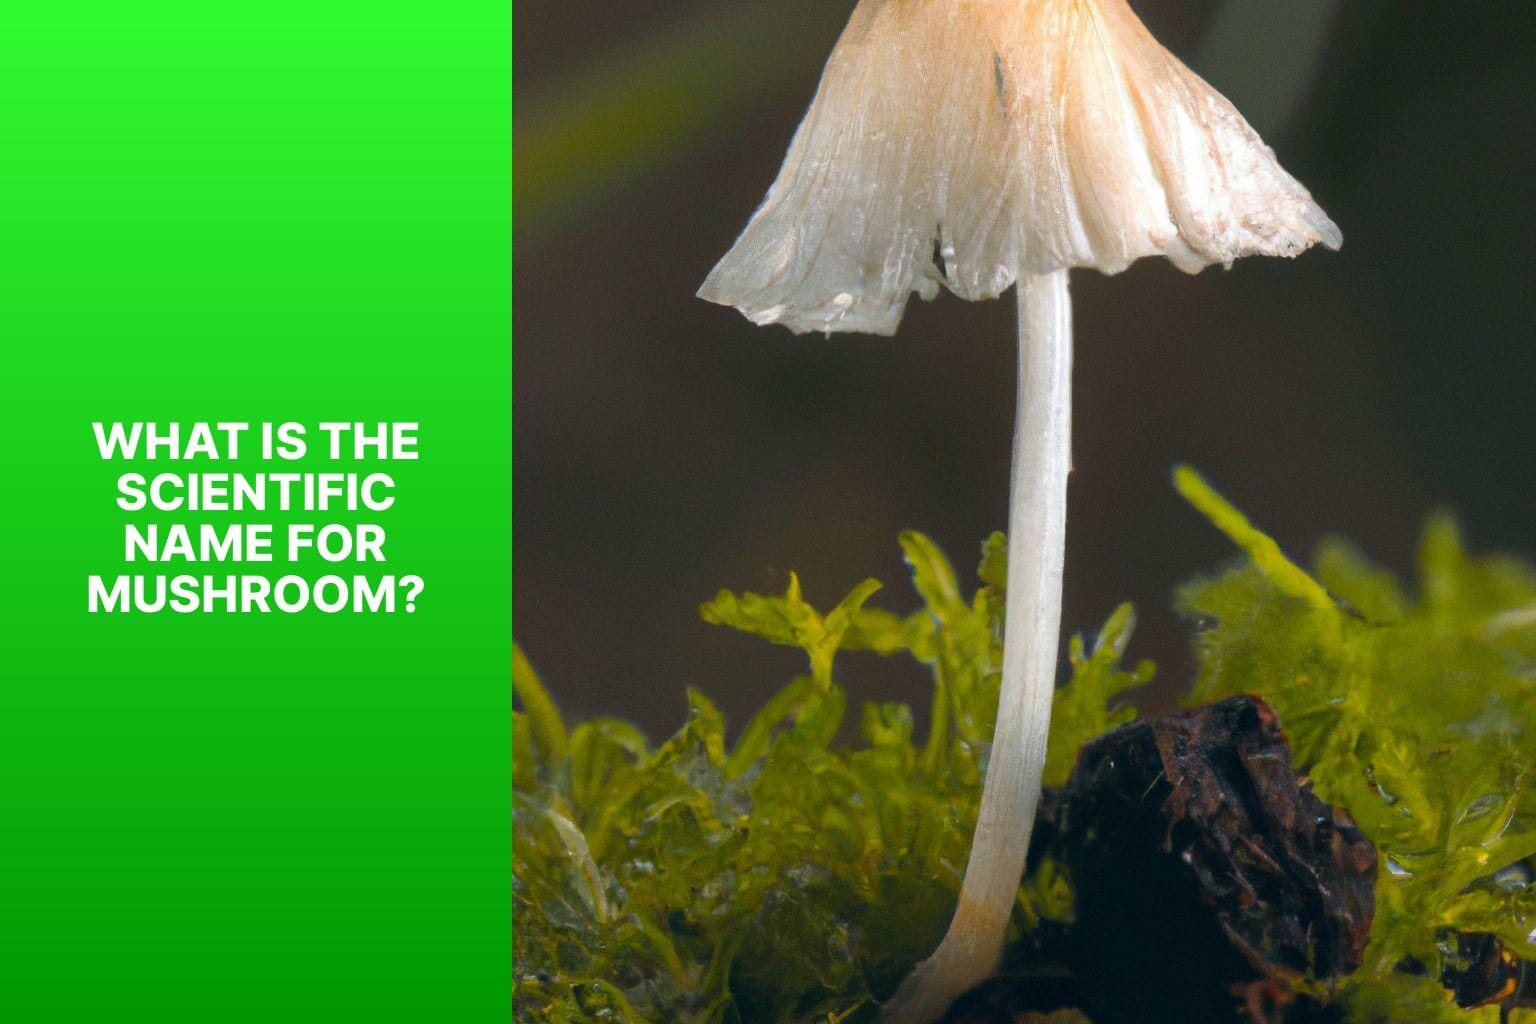 What Is the Scientific Name for Mushroom? - scientific name for mushroom 